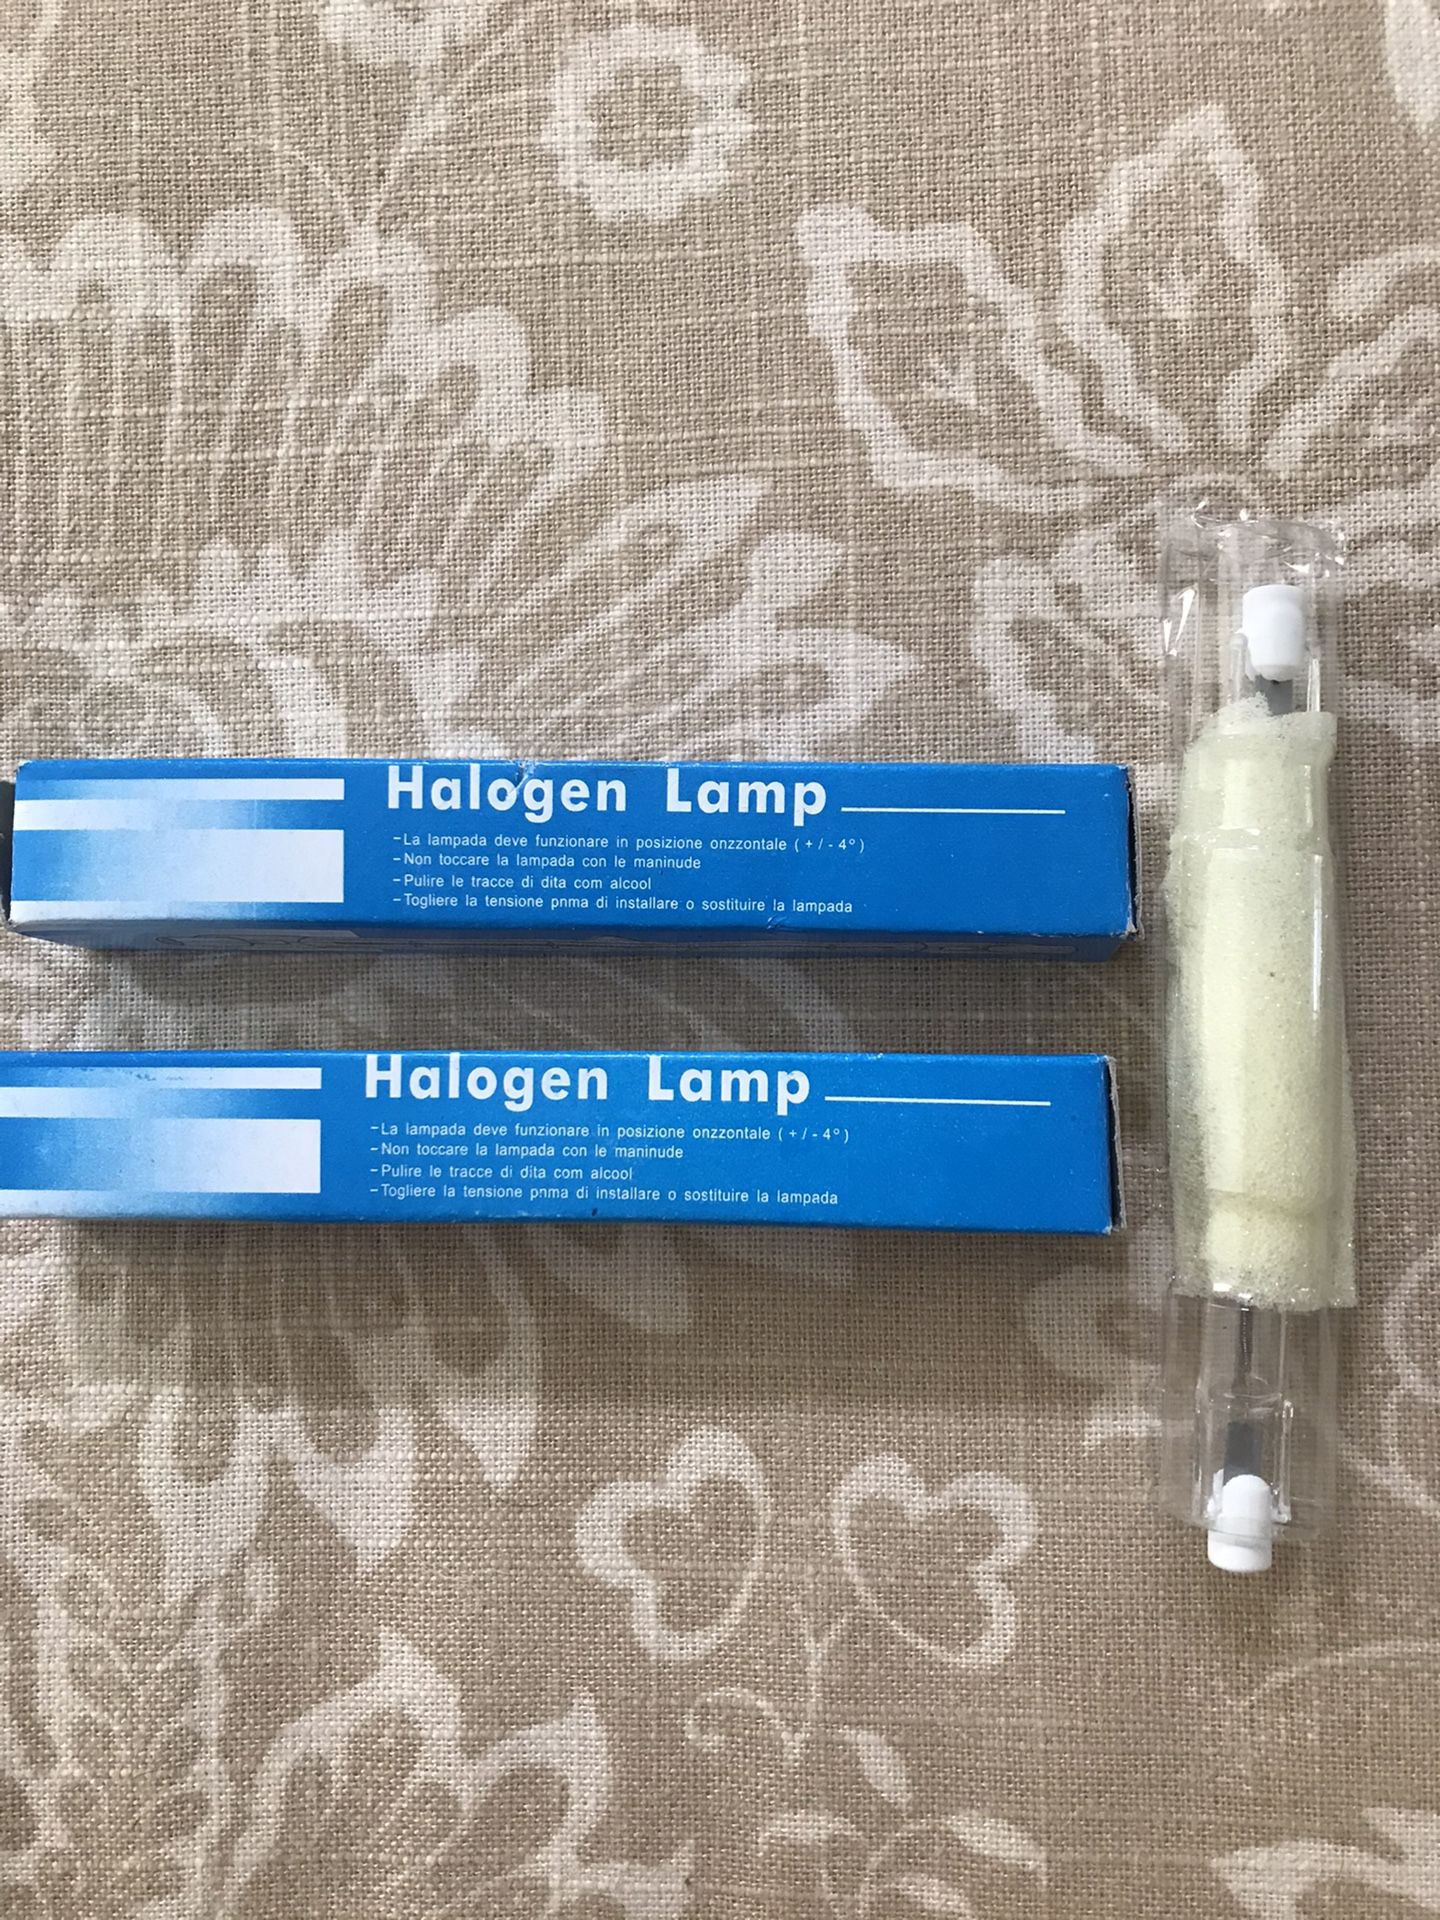 2 Halogen Lamp Bulbs, 110V, 500W, New in Package